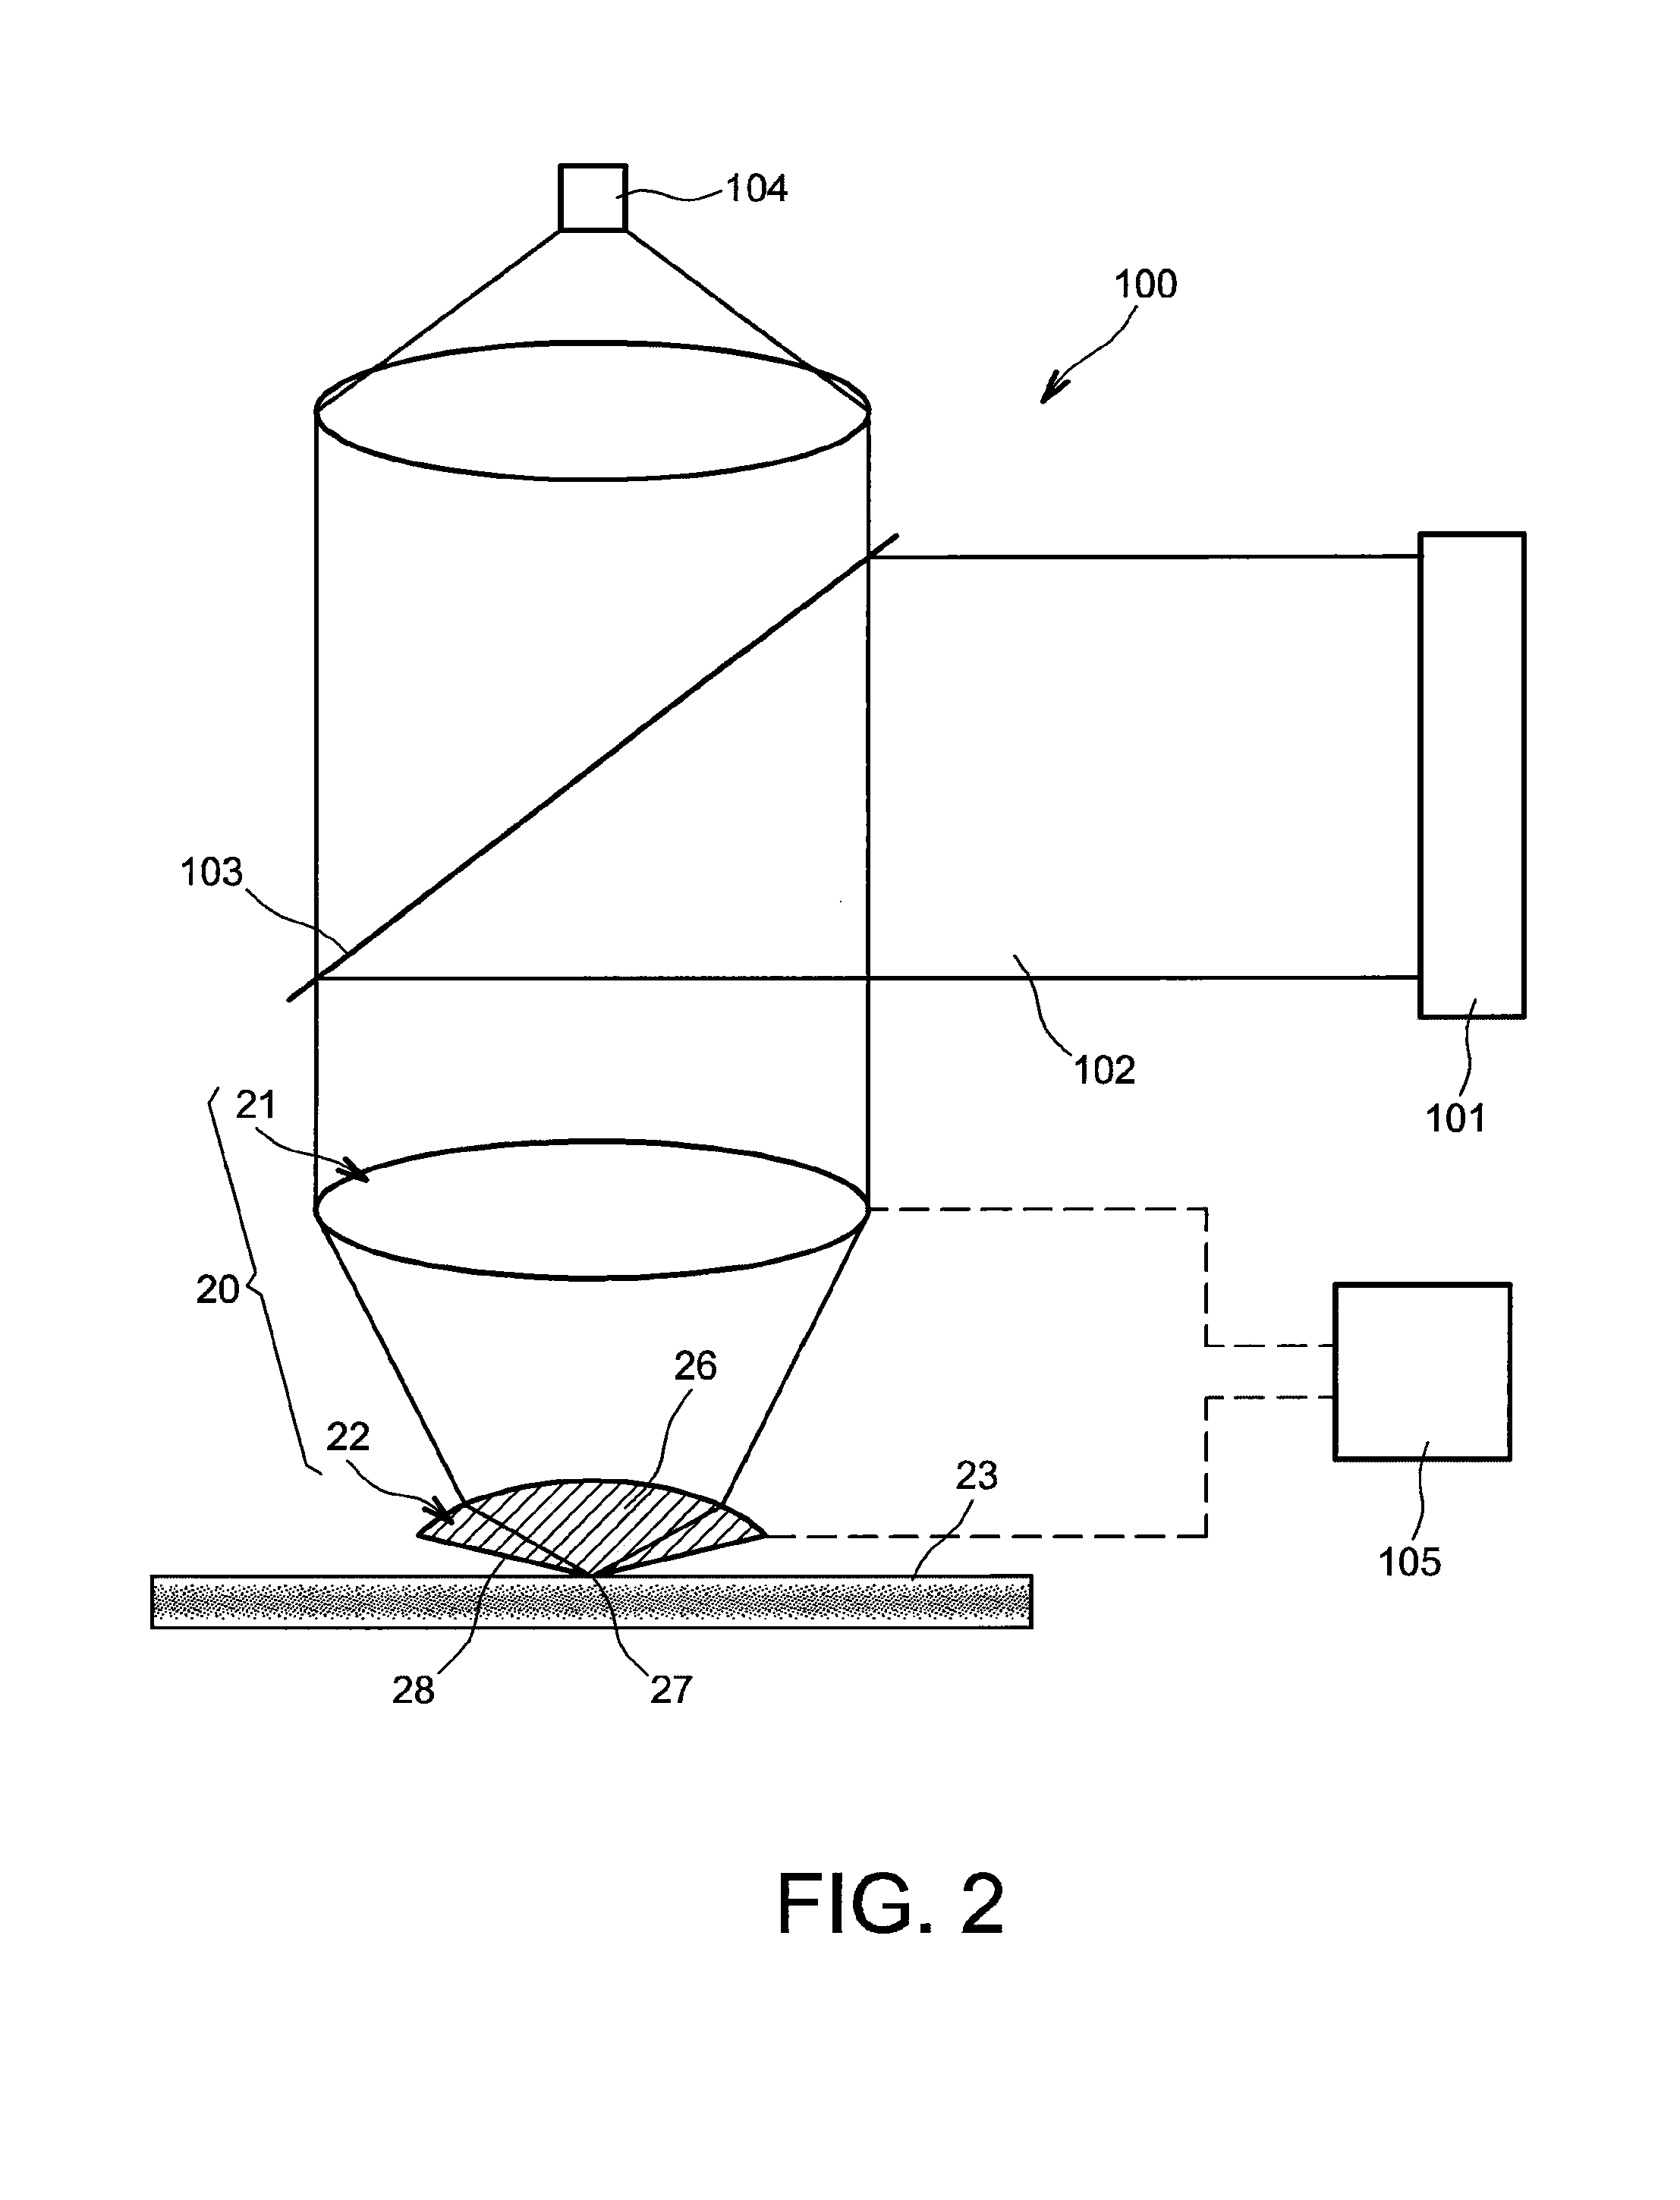 Solid immersion lens with increased focusing capacity